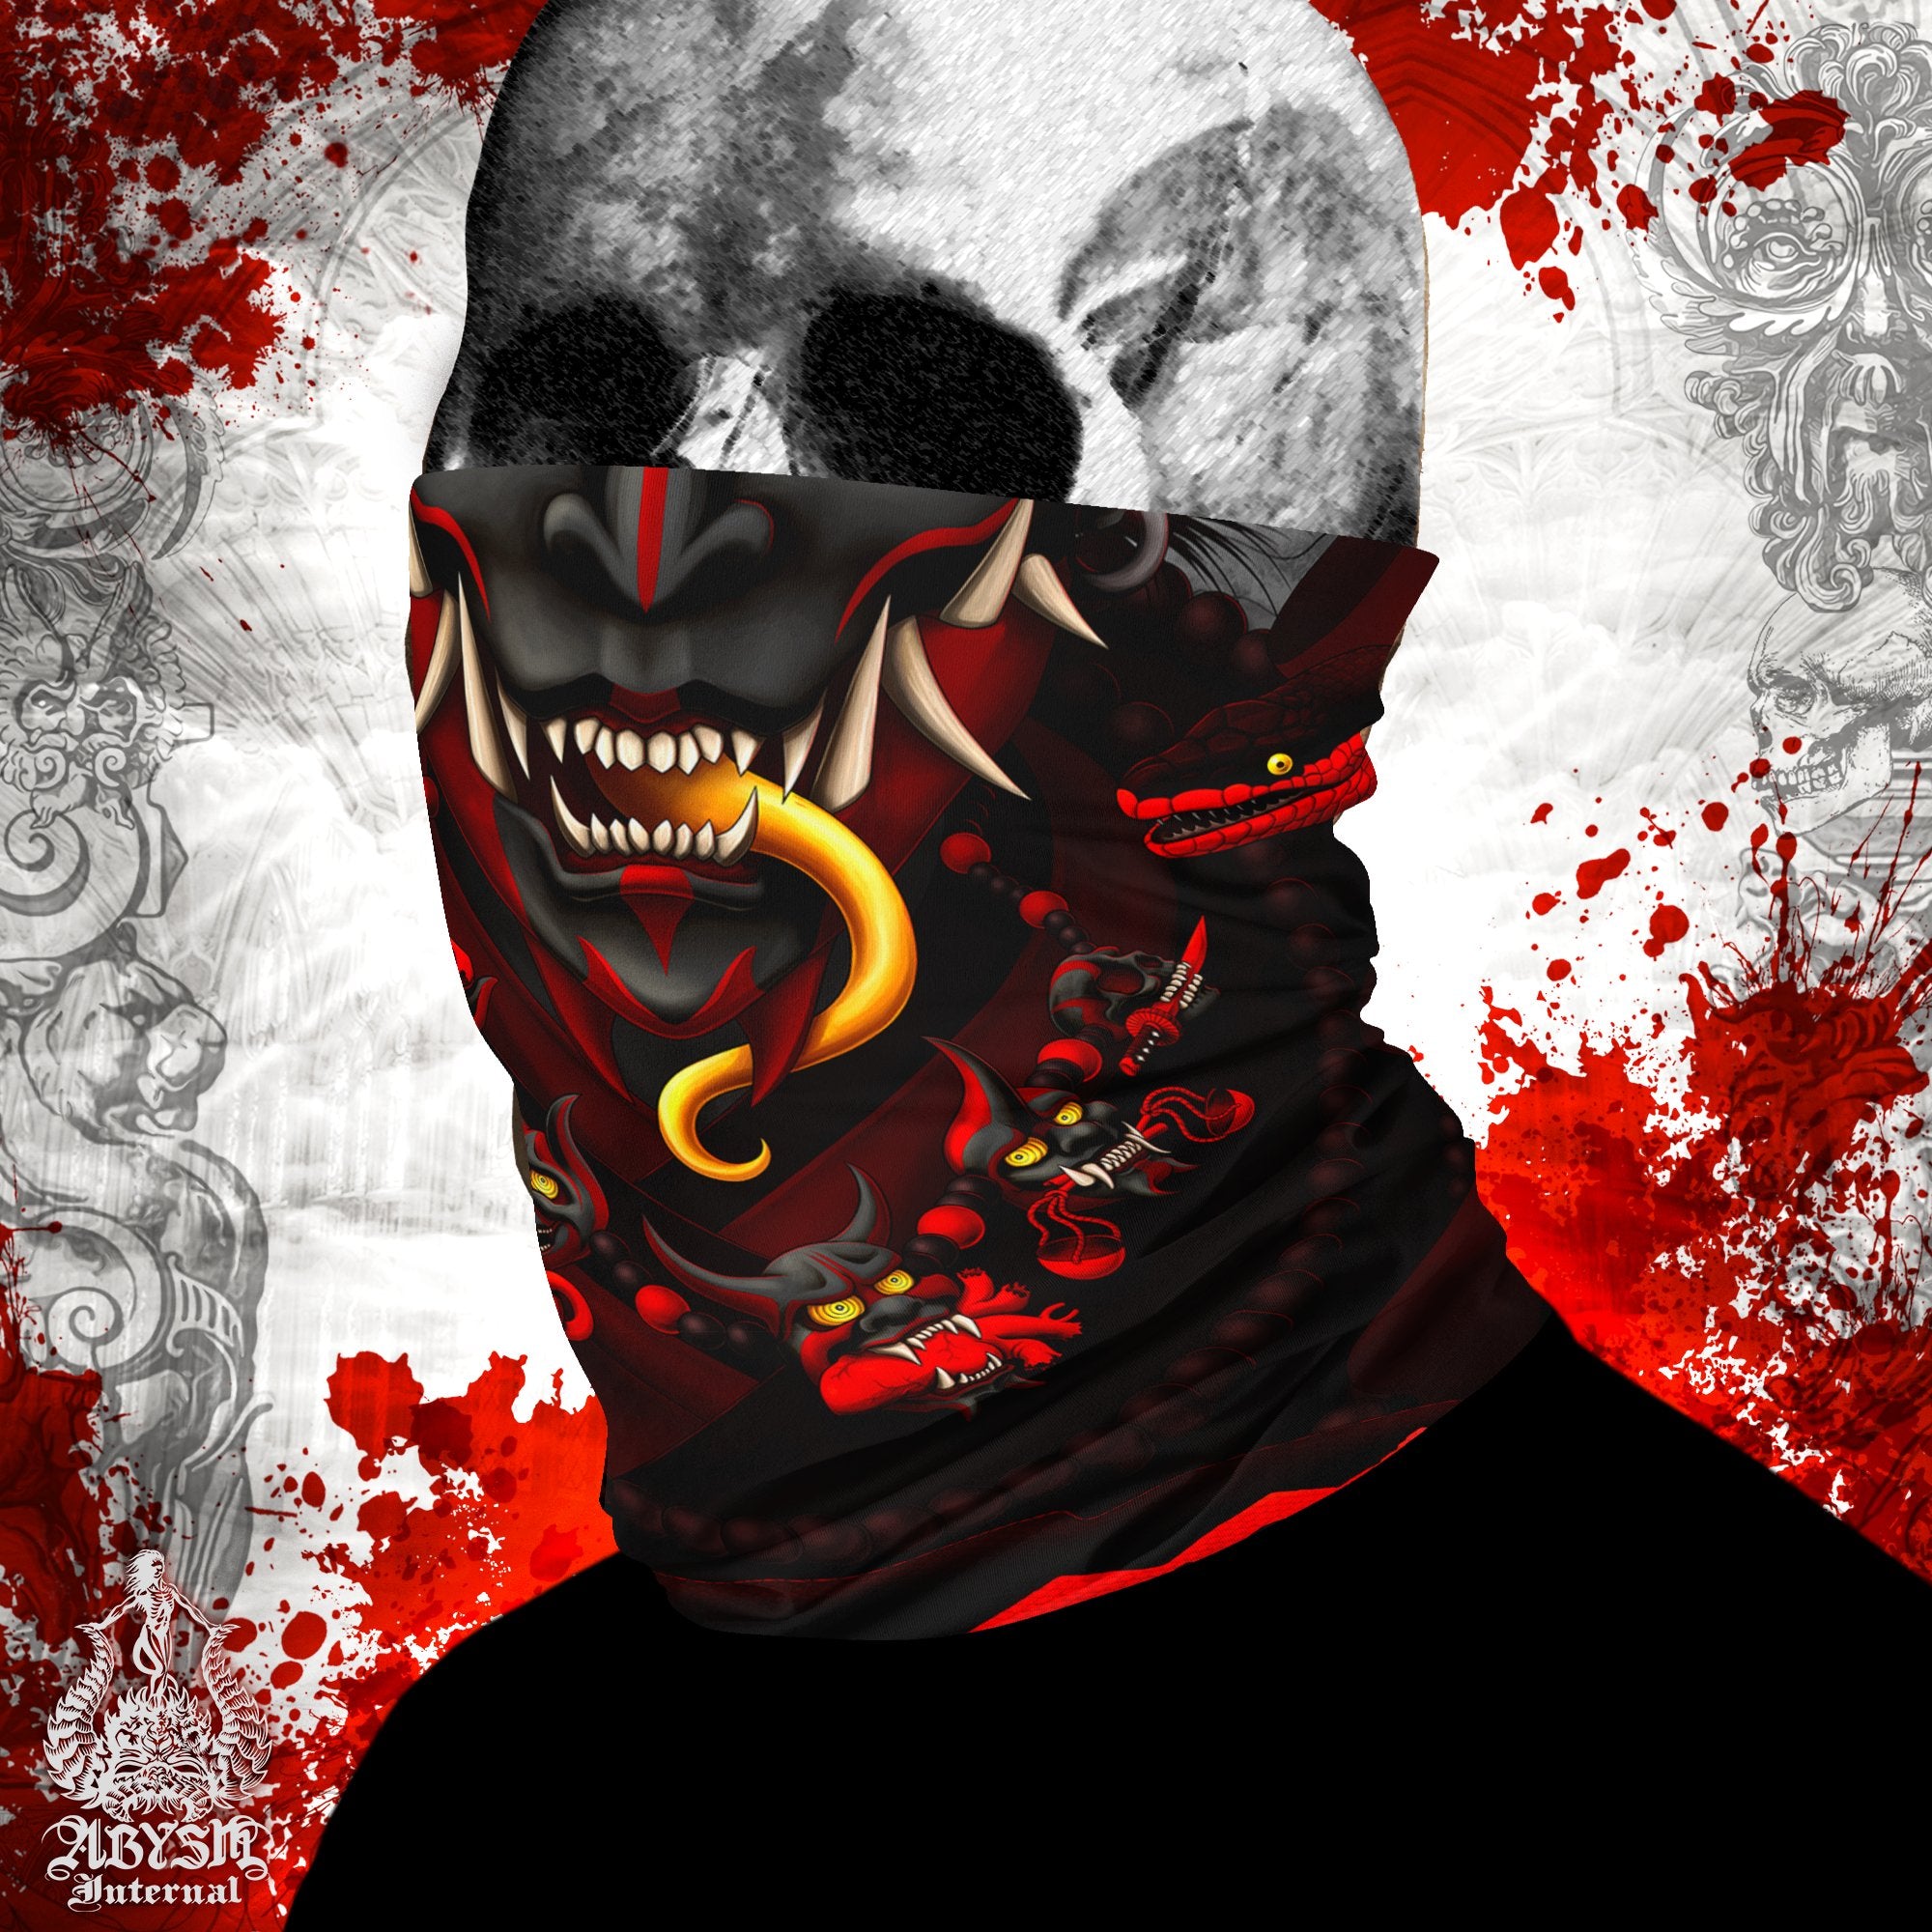 Hannya Neck Gaiter, Demon Face Mask, Japanese Oni Printed Head Covering, Gothic Street Outfit, Snake, Fangs, Headband - Black Red - Abysm Internal